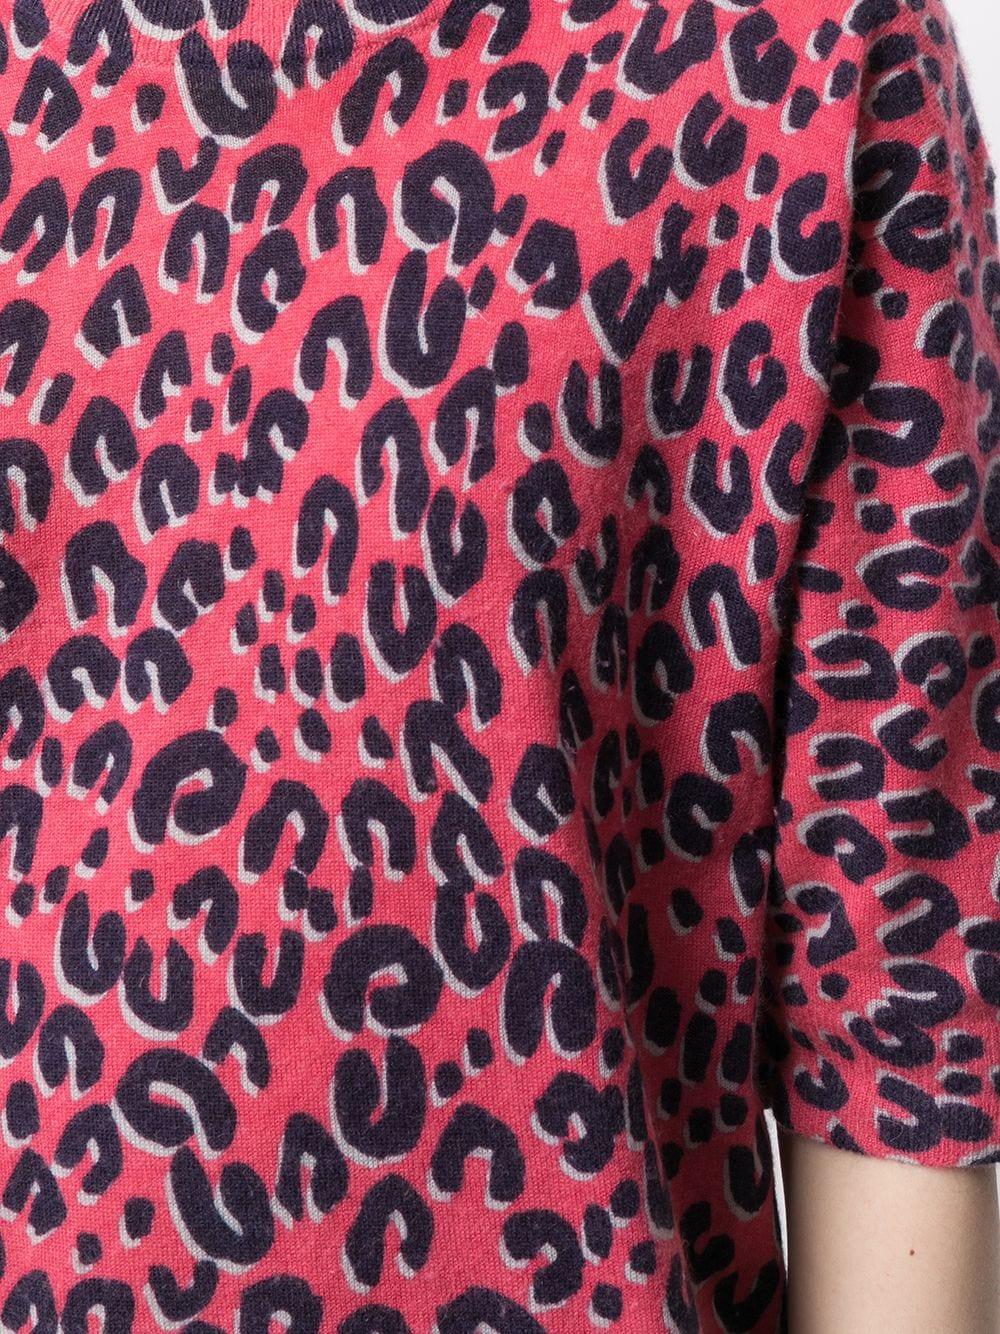 This beautiful pre-owned short-sleeved jumper from Louis Vuitton and Stephen Sprouse collaboration was meticulously crafted in France from pink cashmere and features a distinctive leopard print design, a crew neck and a straight fit.  Accessorise